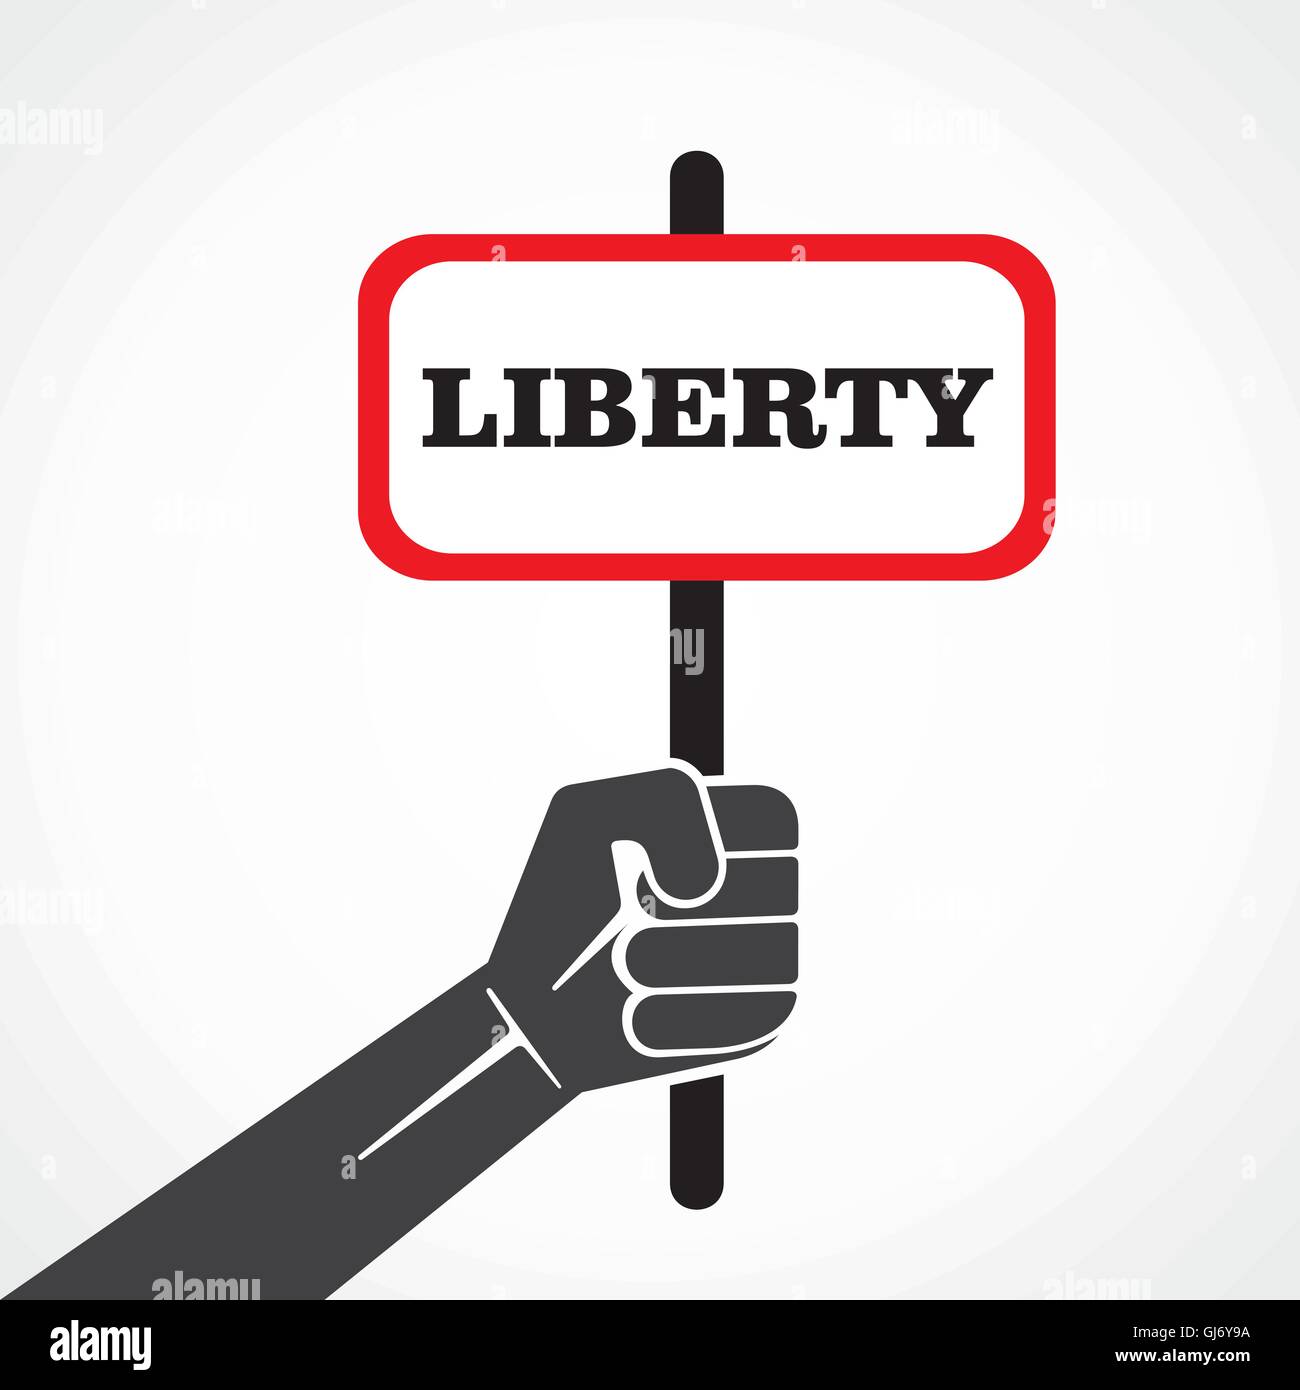 liberty word banner hold in hand stock vector Stock Vector